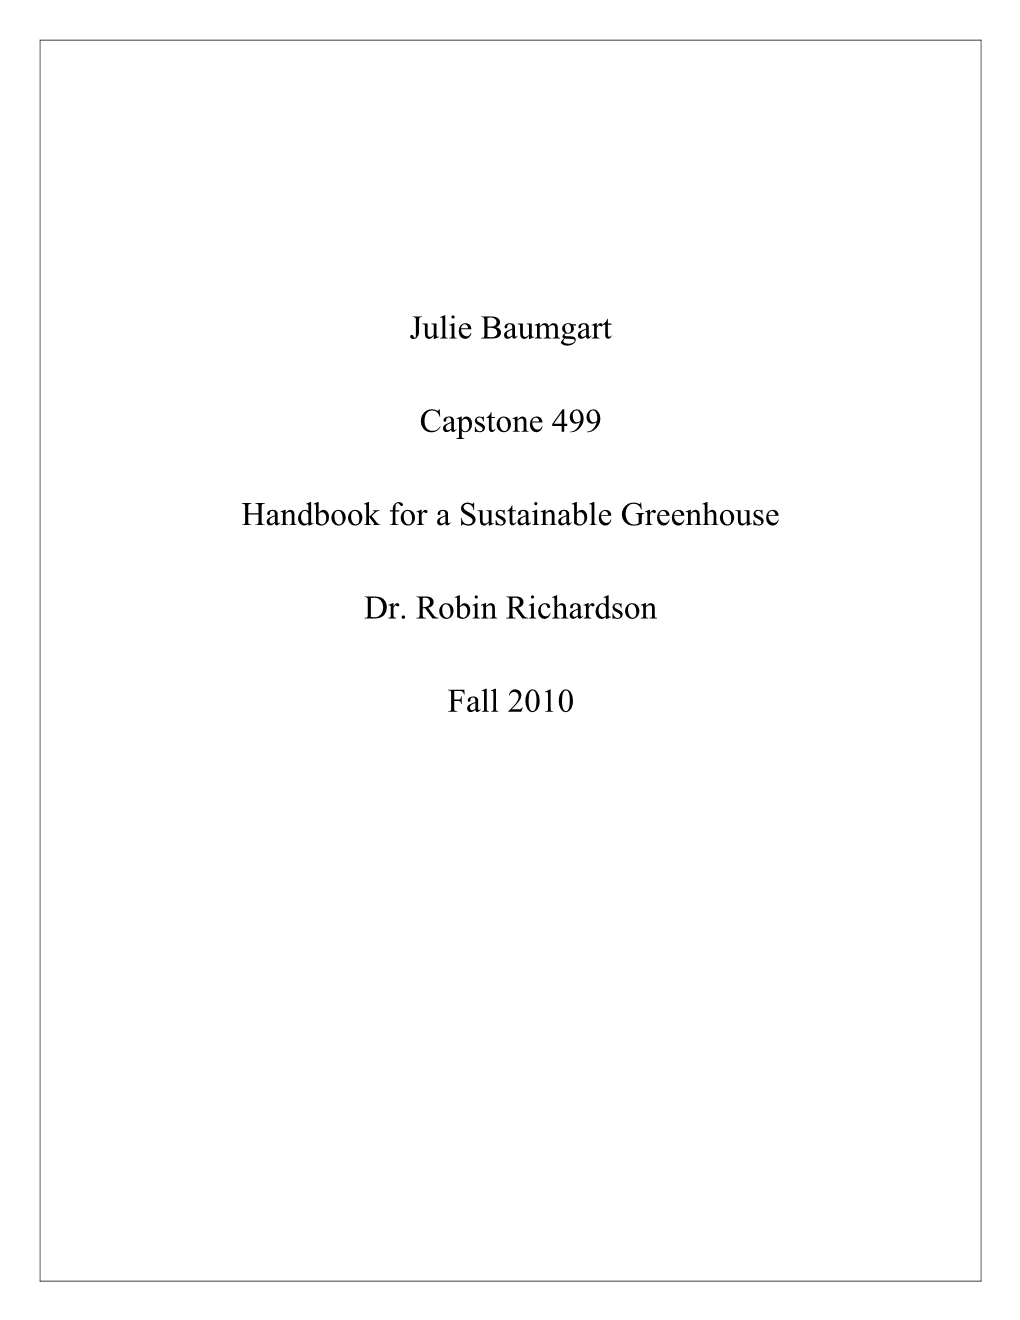 Handbook for a Sustainable Greenhouse